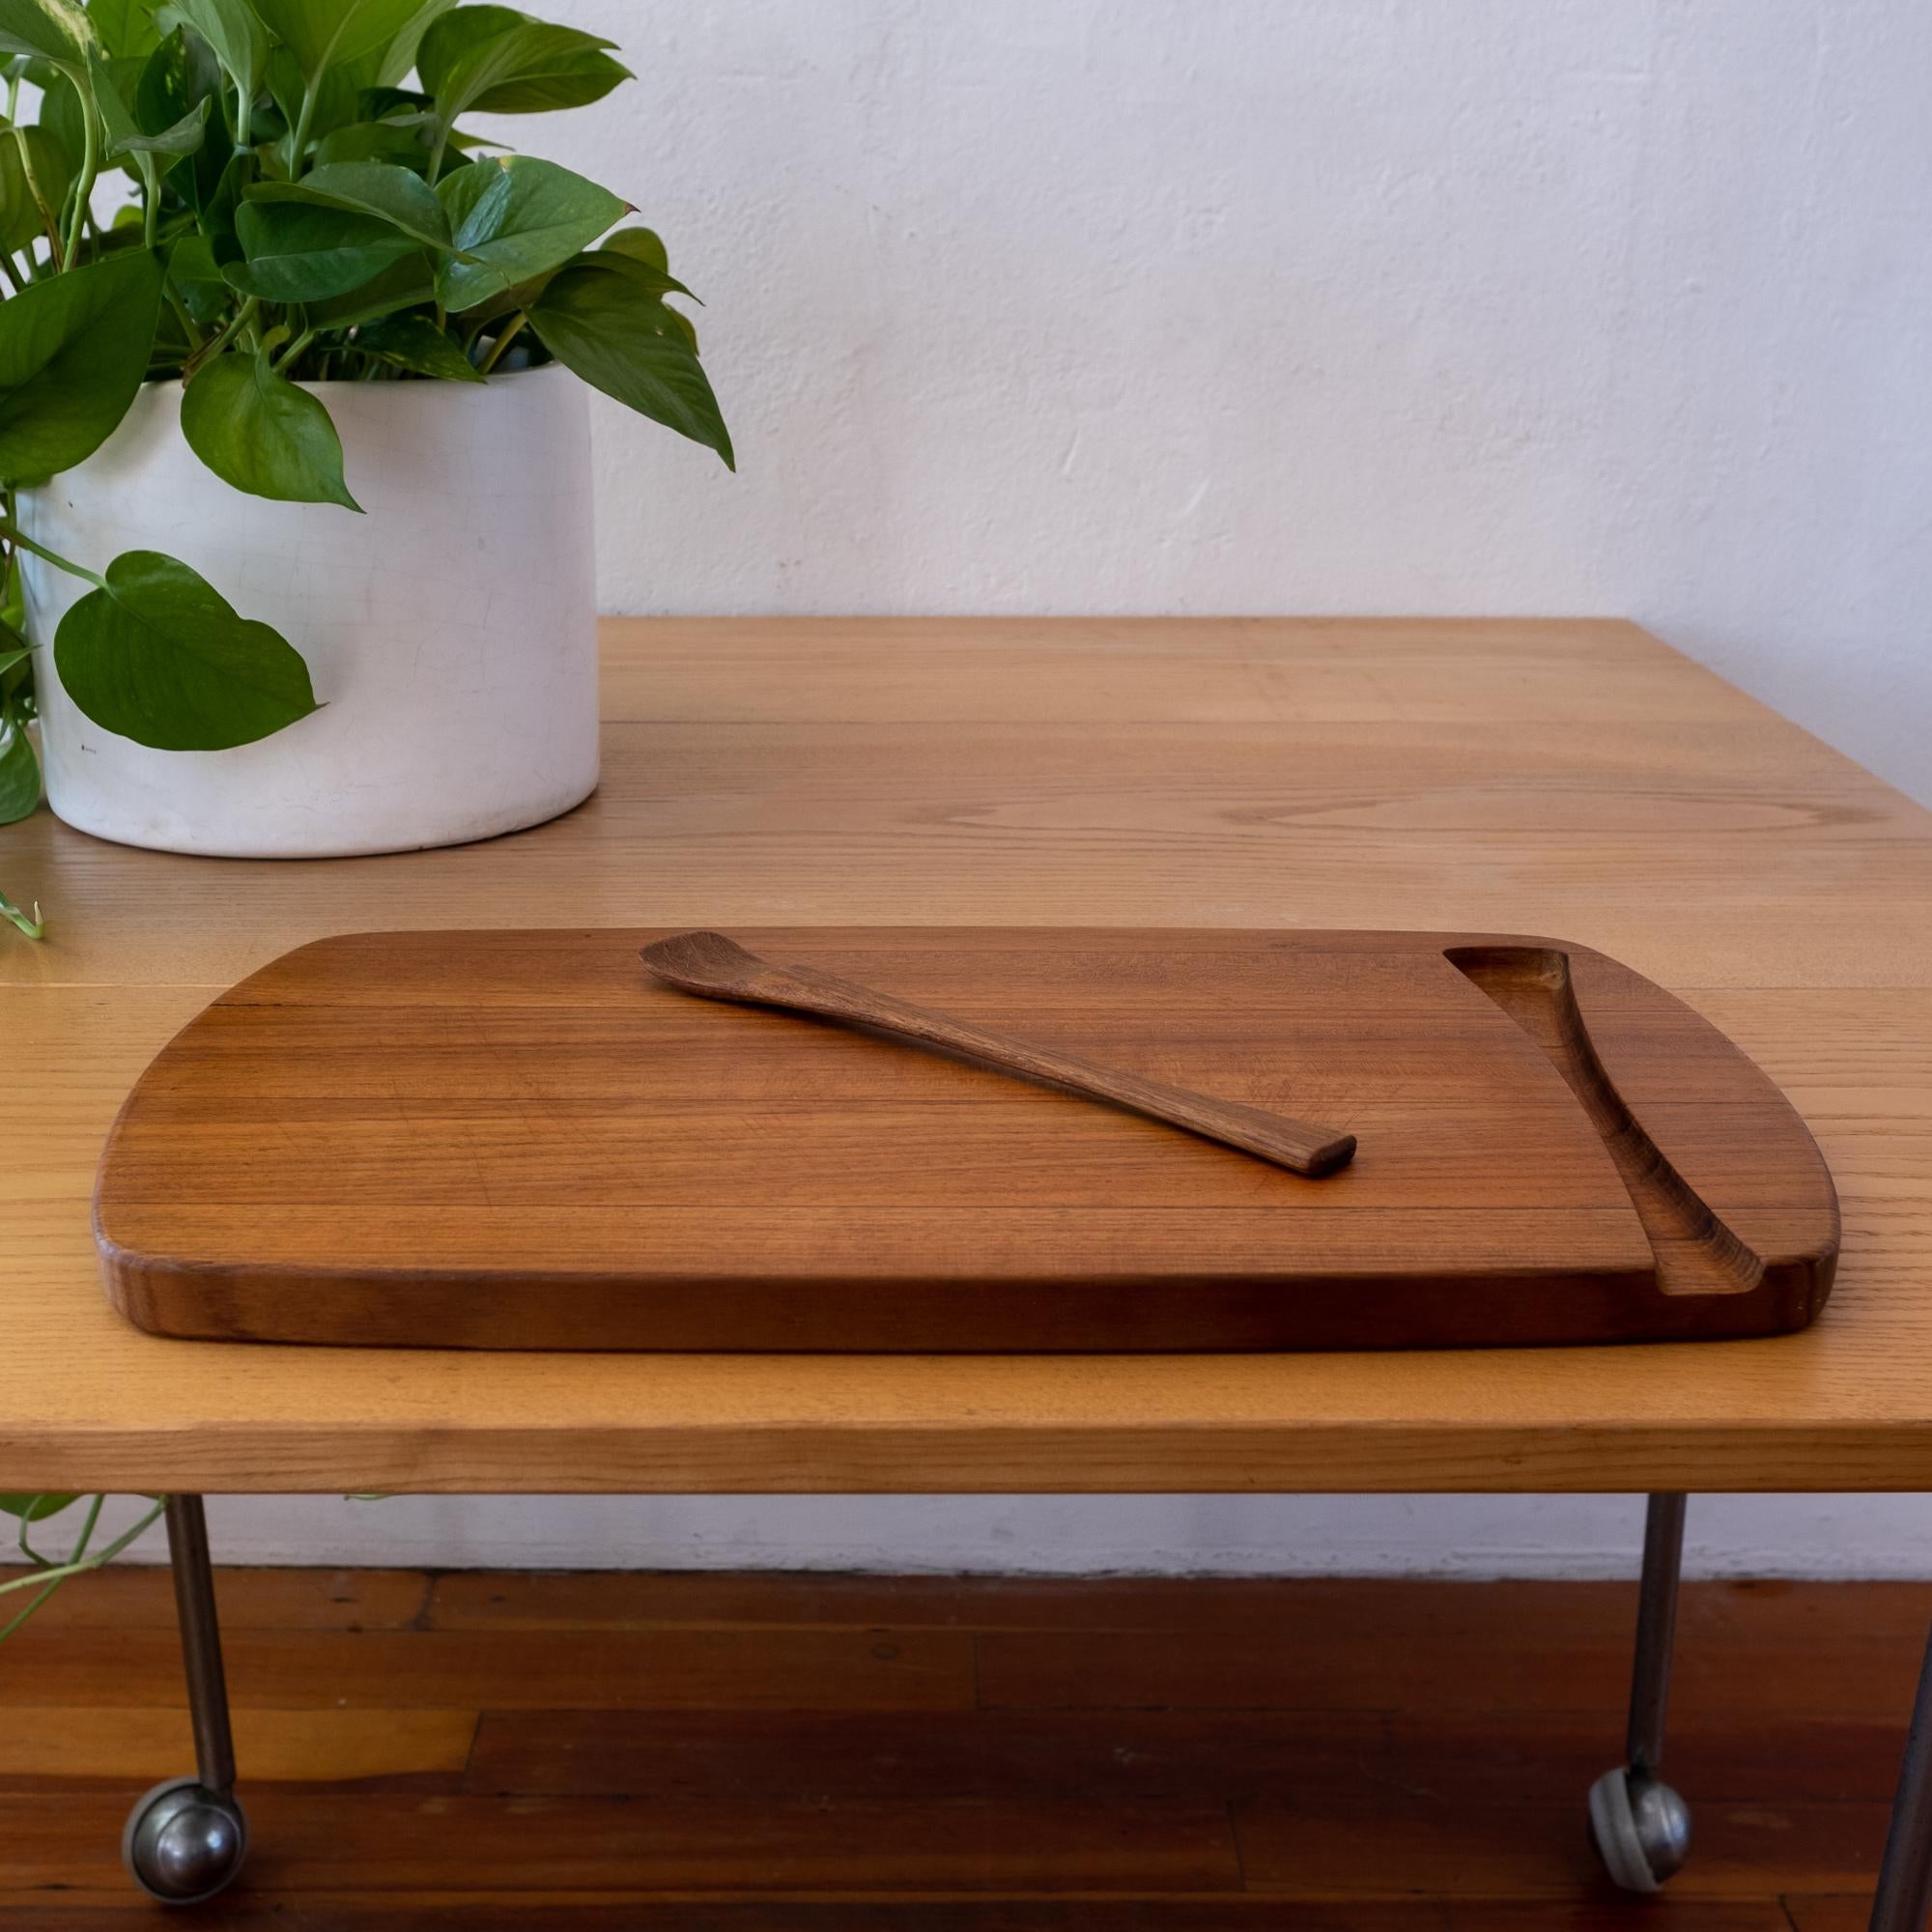 Early Dansk tray with incorporated spoon by Jens Quistgaard. Staved teak with great joinery detailing. Includes the earliest Dansk stamp. This is a hard piece to find, Denmark, 1950s.